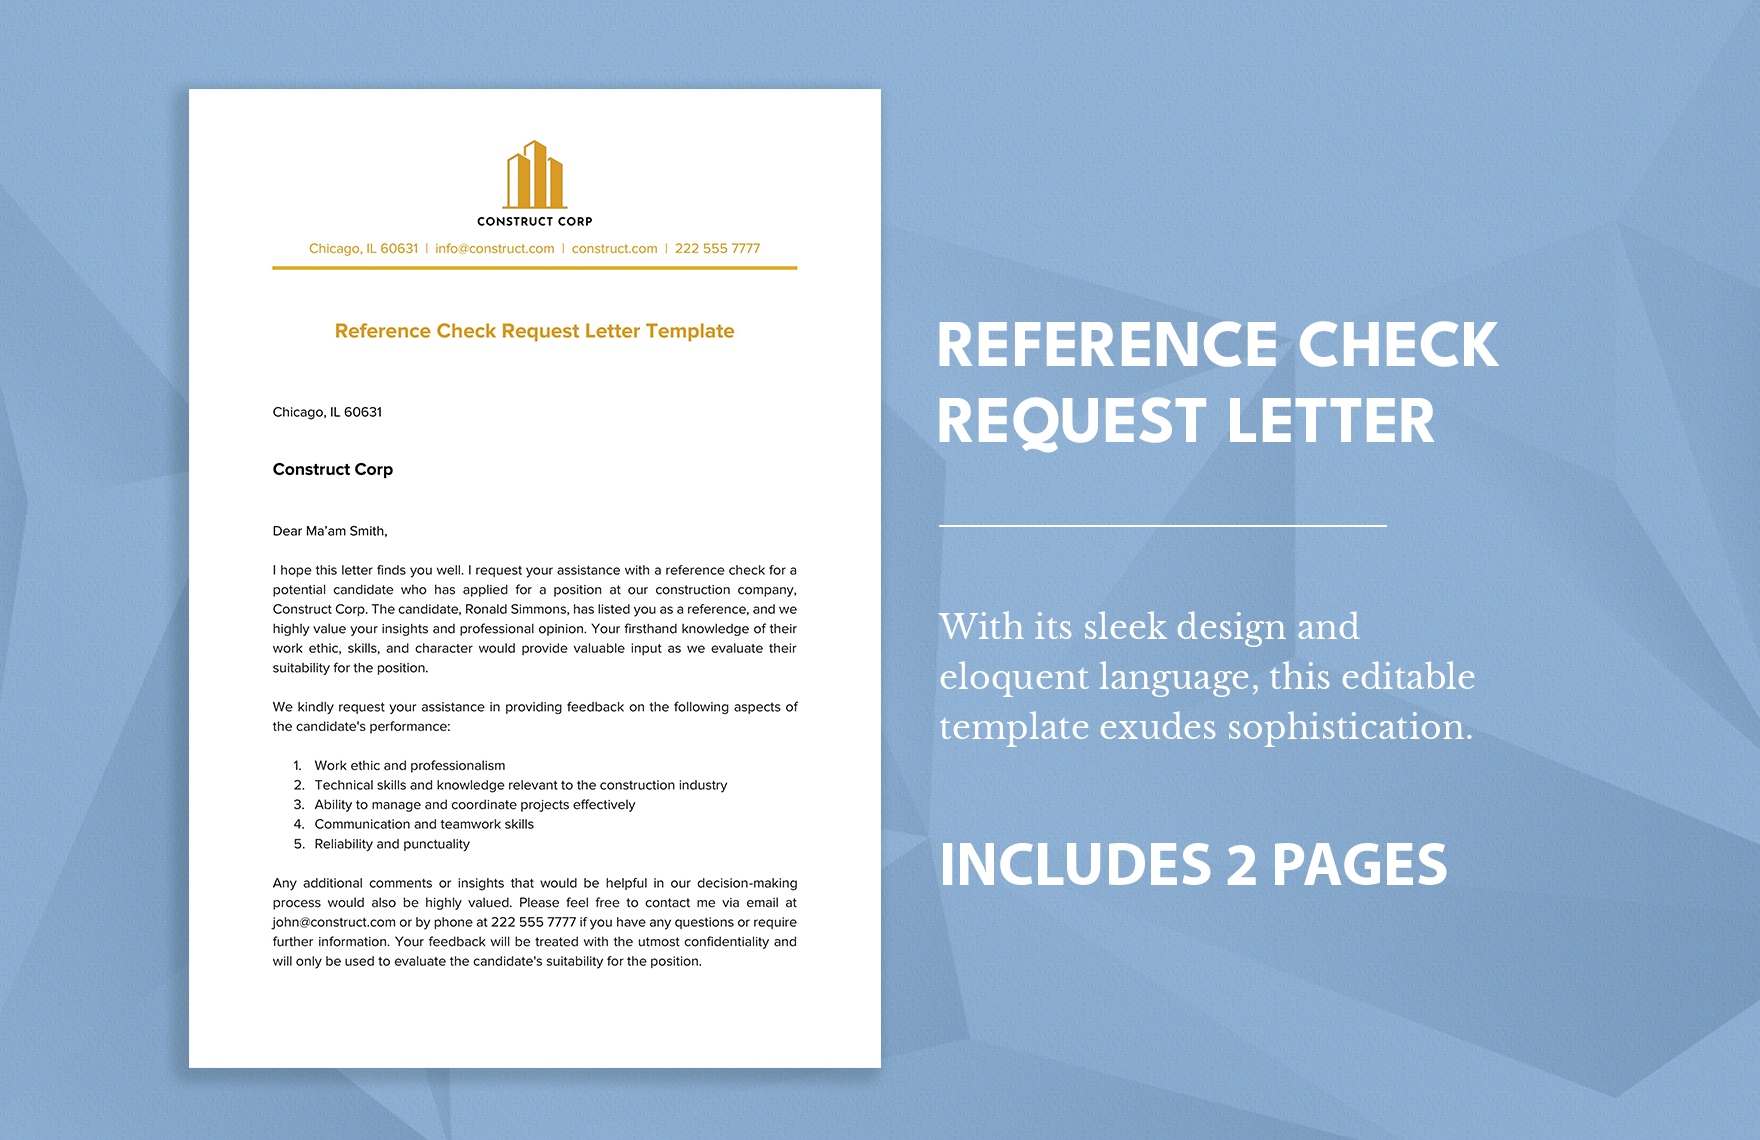 Reference Check Request Letter